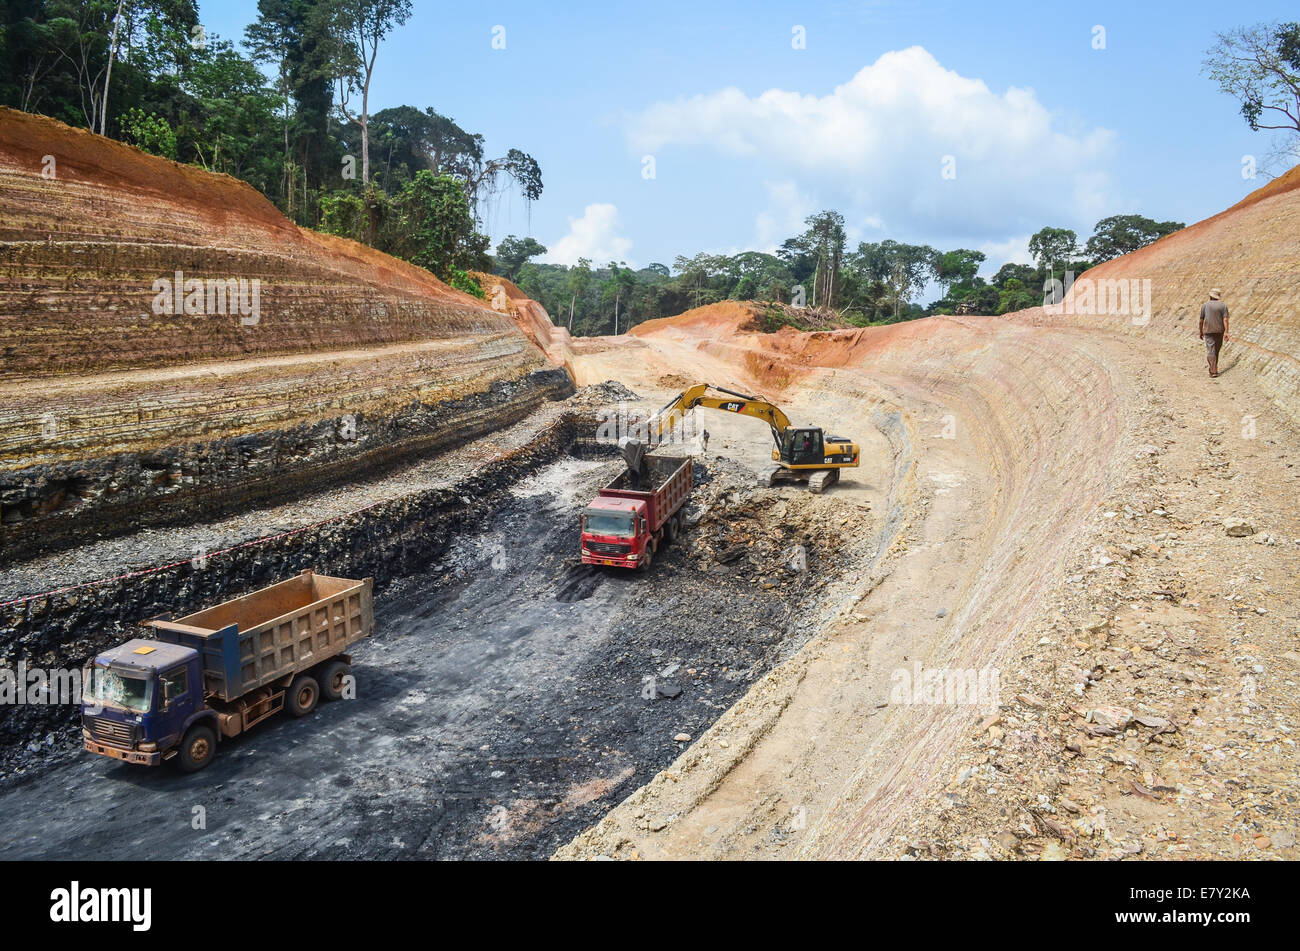 Chinese SinoHydro (engineering and construction) building the 'route economique' between Libreville and Franceville in Gabon Stock Photo